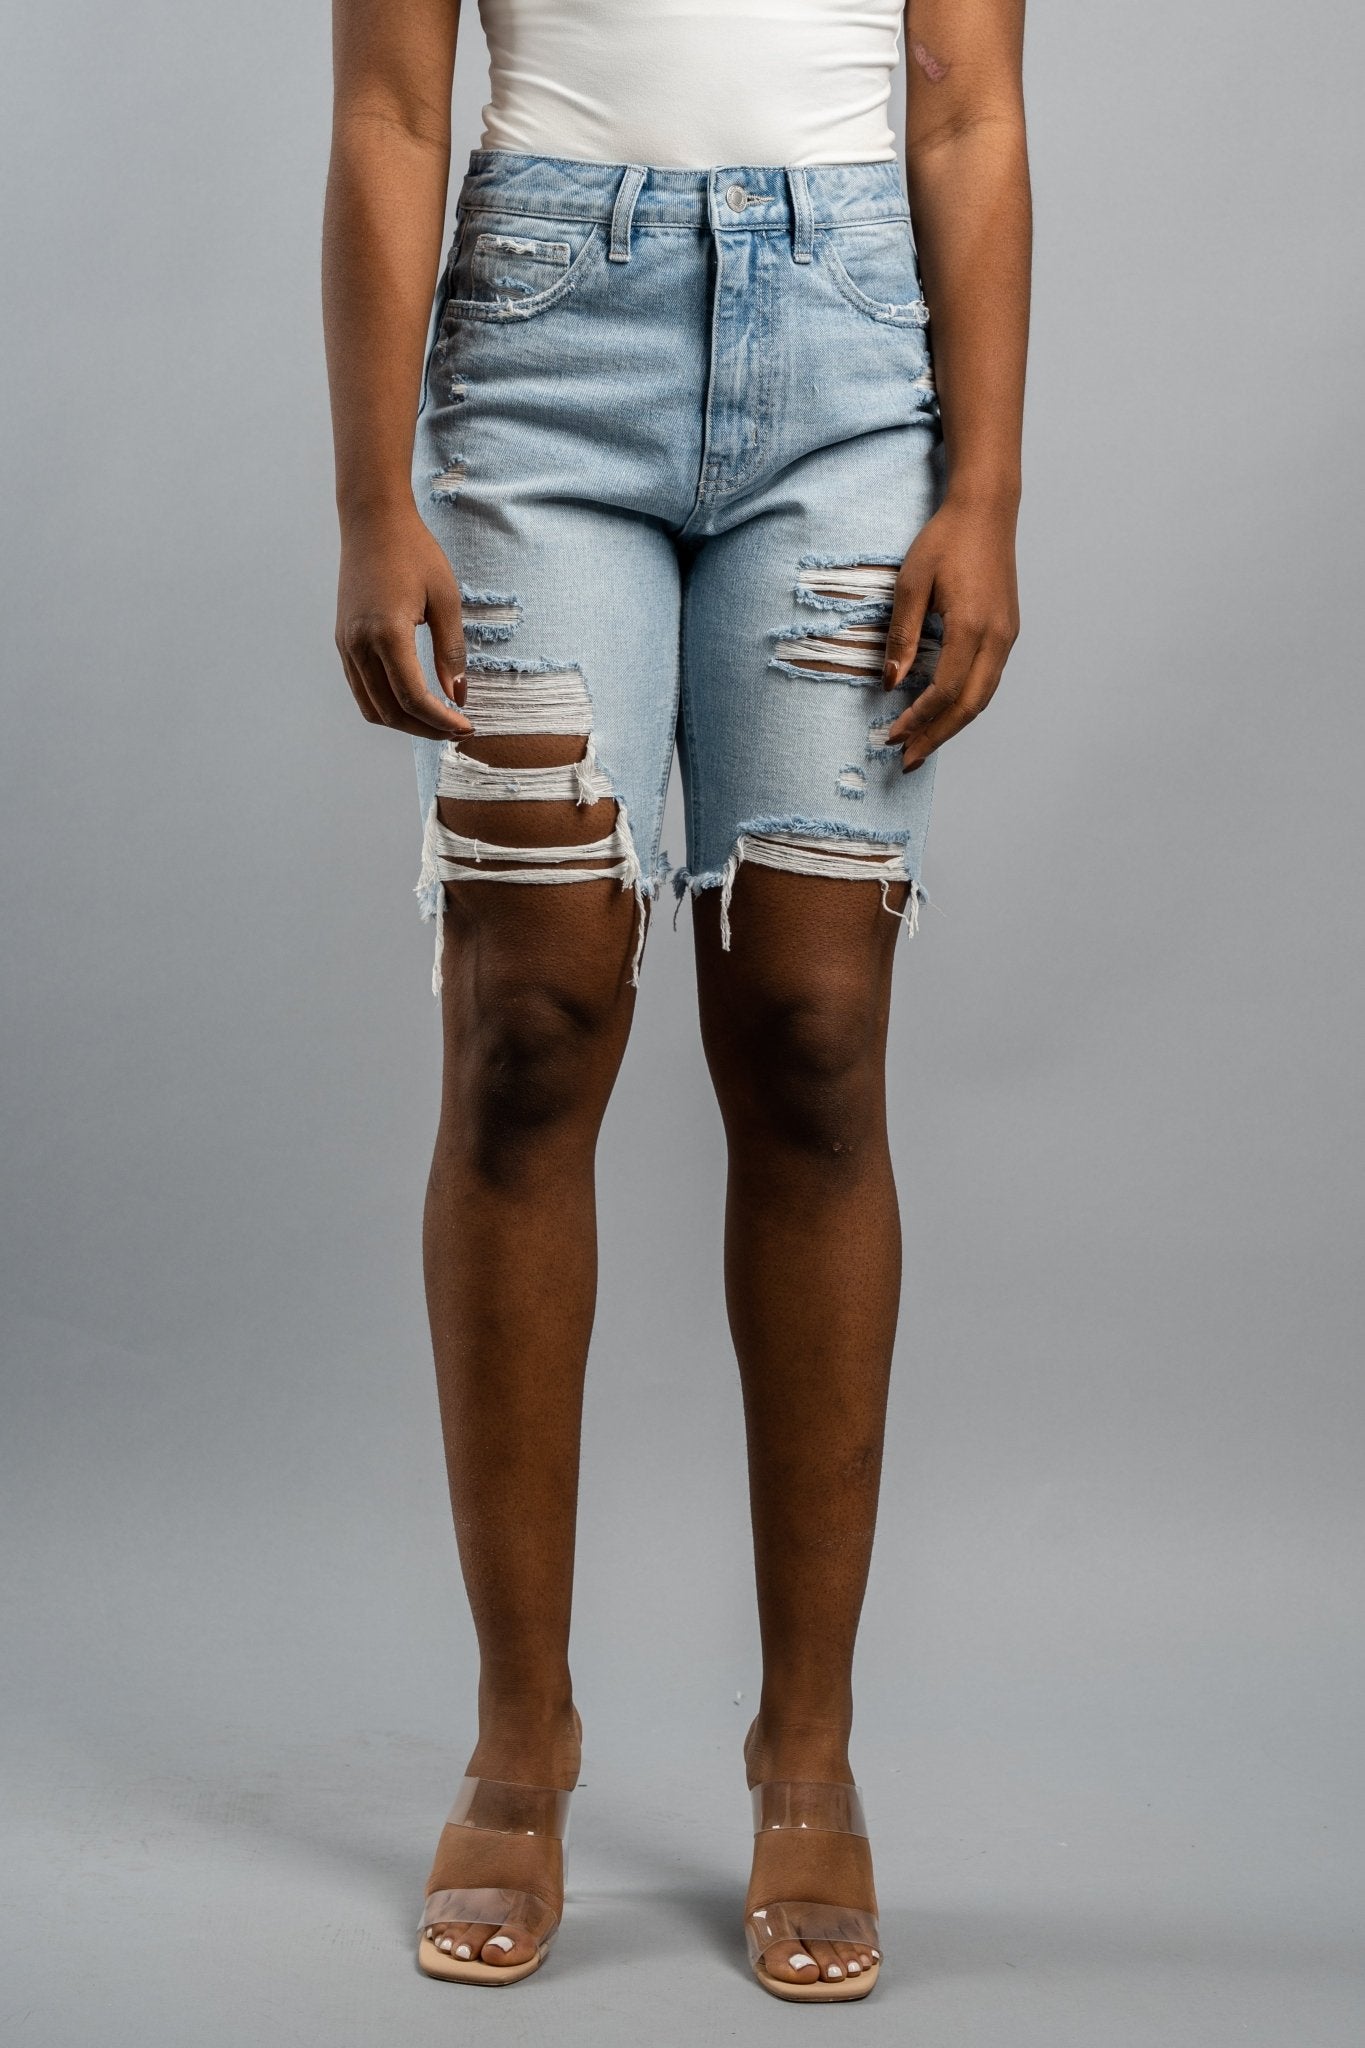 Vervet high rise distressed bermuda shorts Ledro - Stylish Shorts - Trendy Staycation Outfits at Lush Fashion Lounge Boutique in Oklahoma City